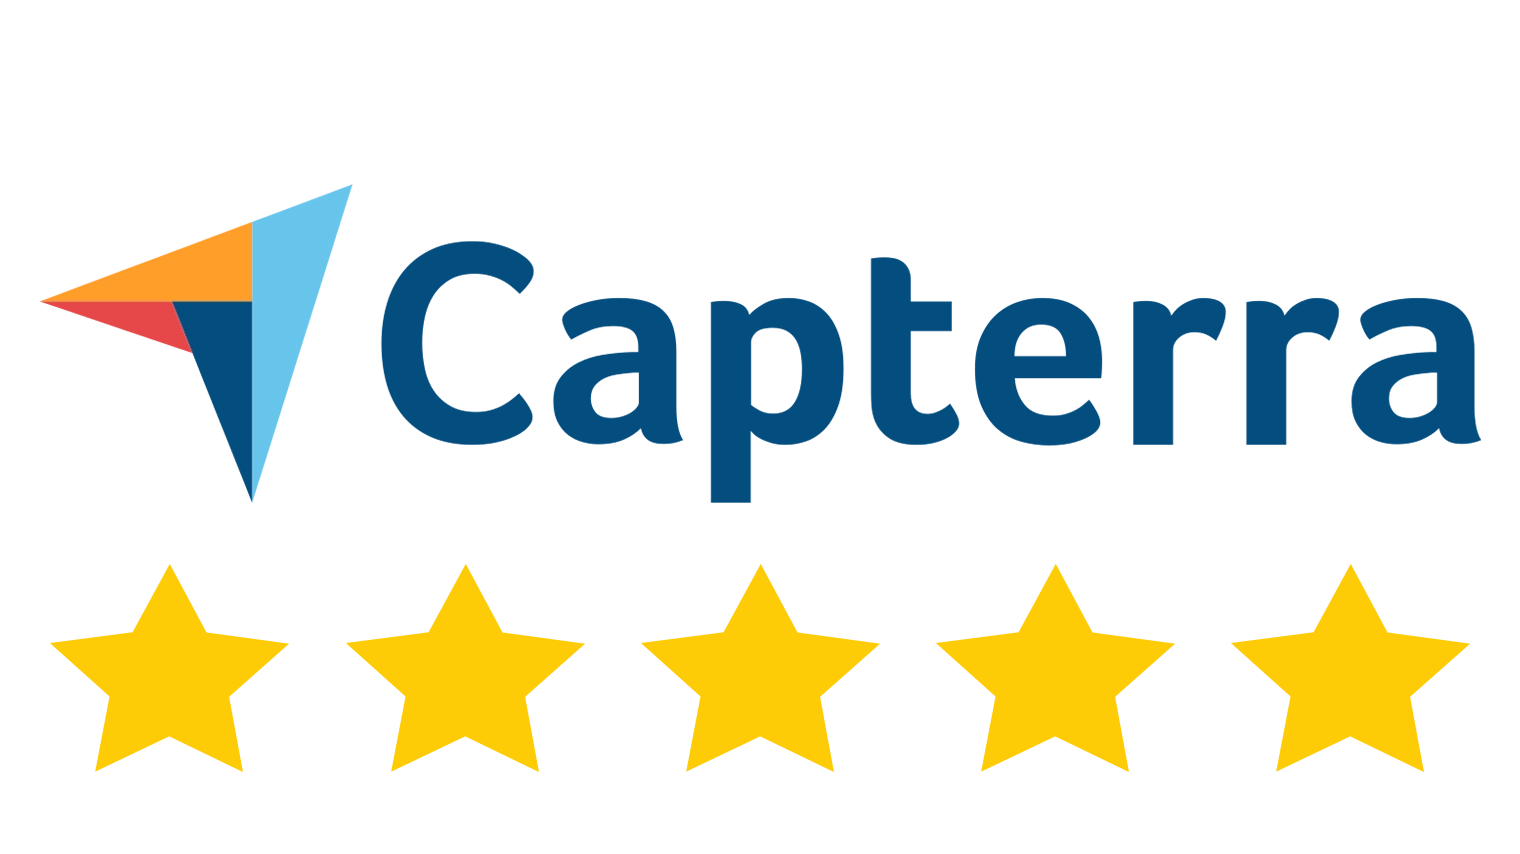 Effective contract lifecycle management tool for automation Capterra 5-star rating